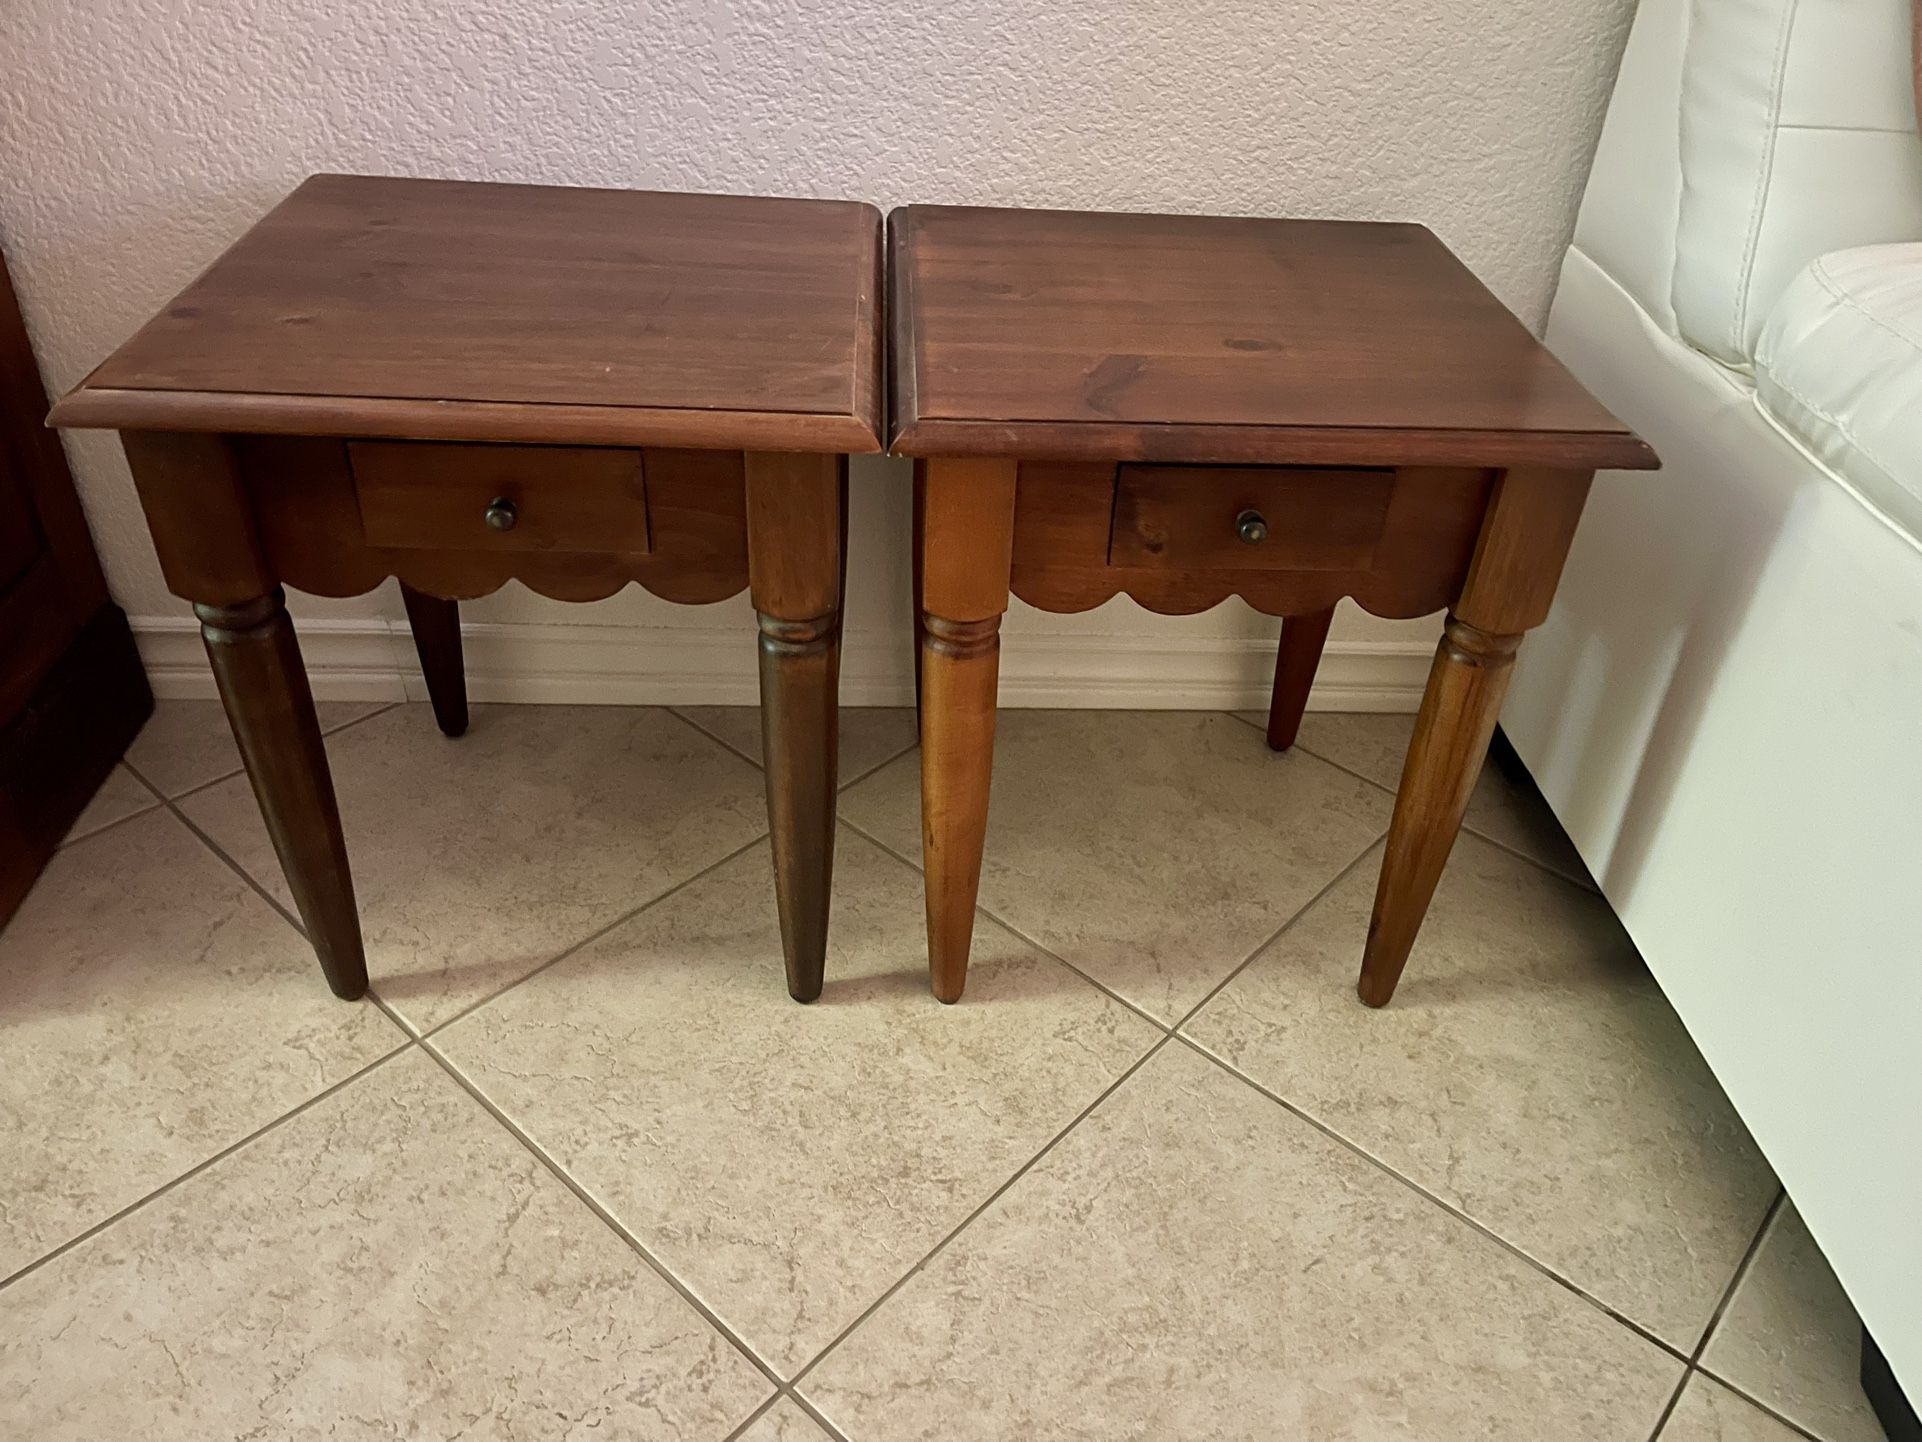 2 Pier 1 Imports Sofa End Bedside Tables with drawers